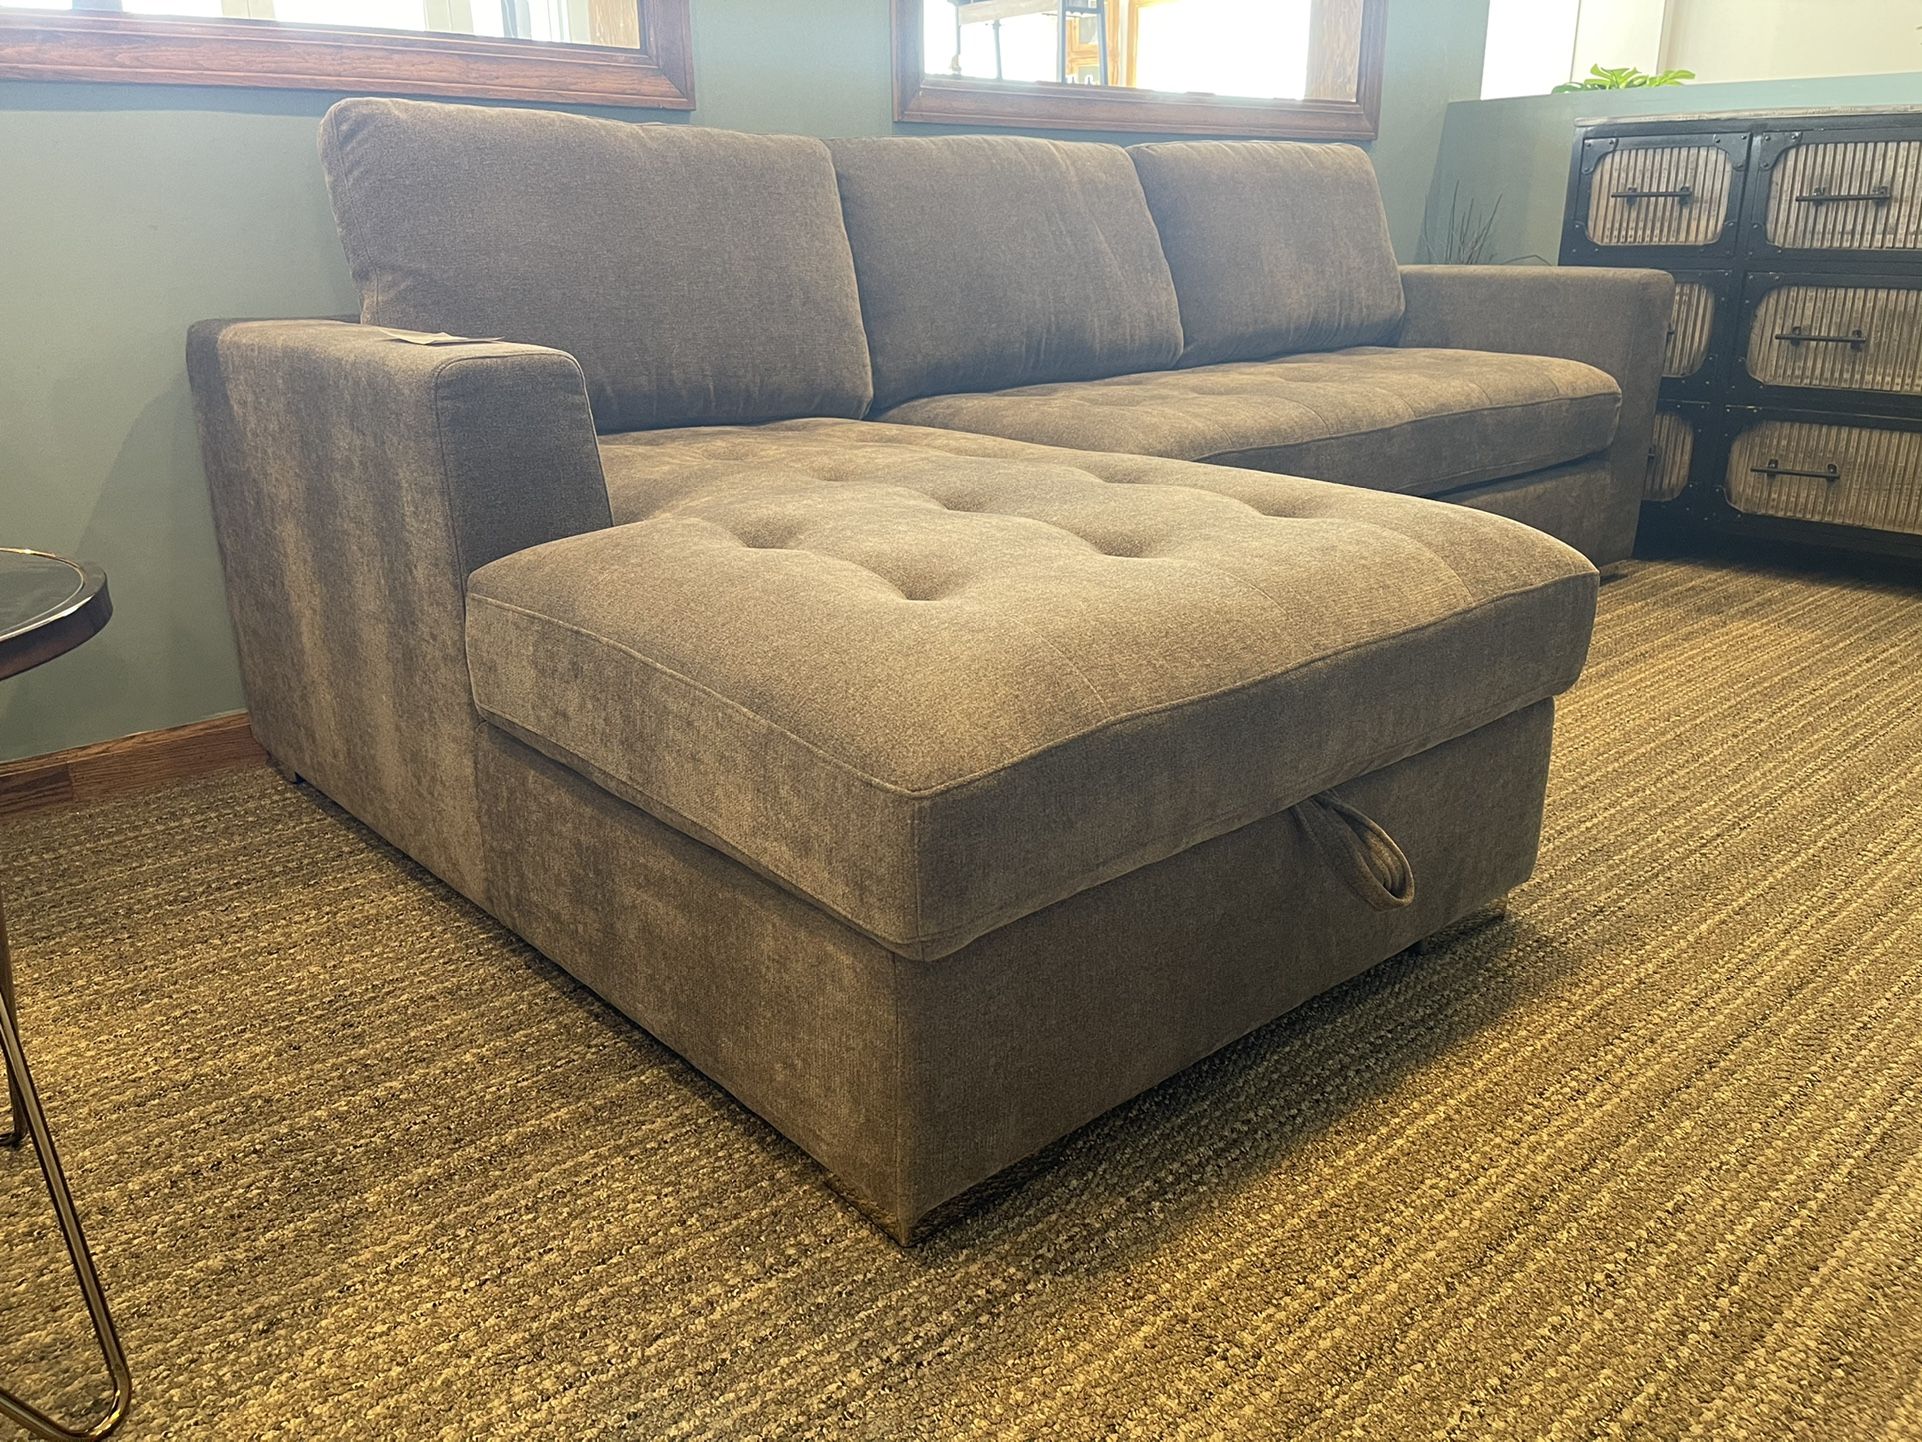 Sleeper Pullout Sectional with storage in Chase (please read description for full cost)